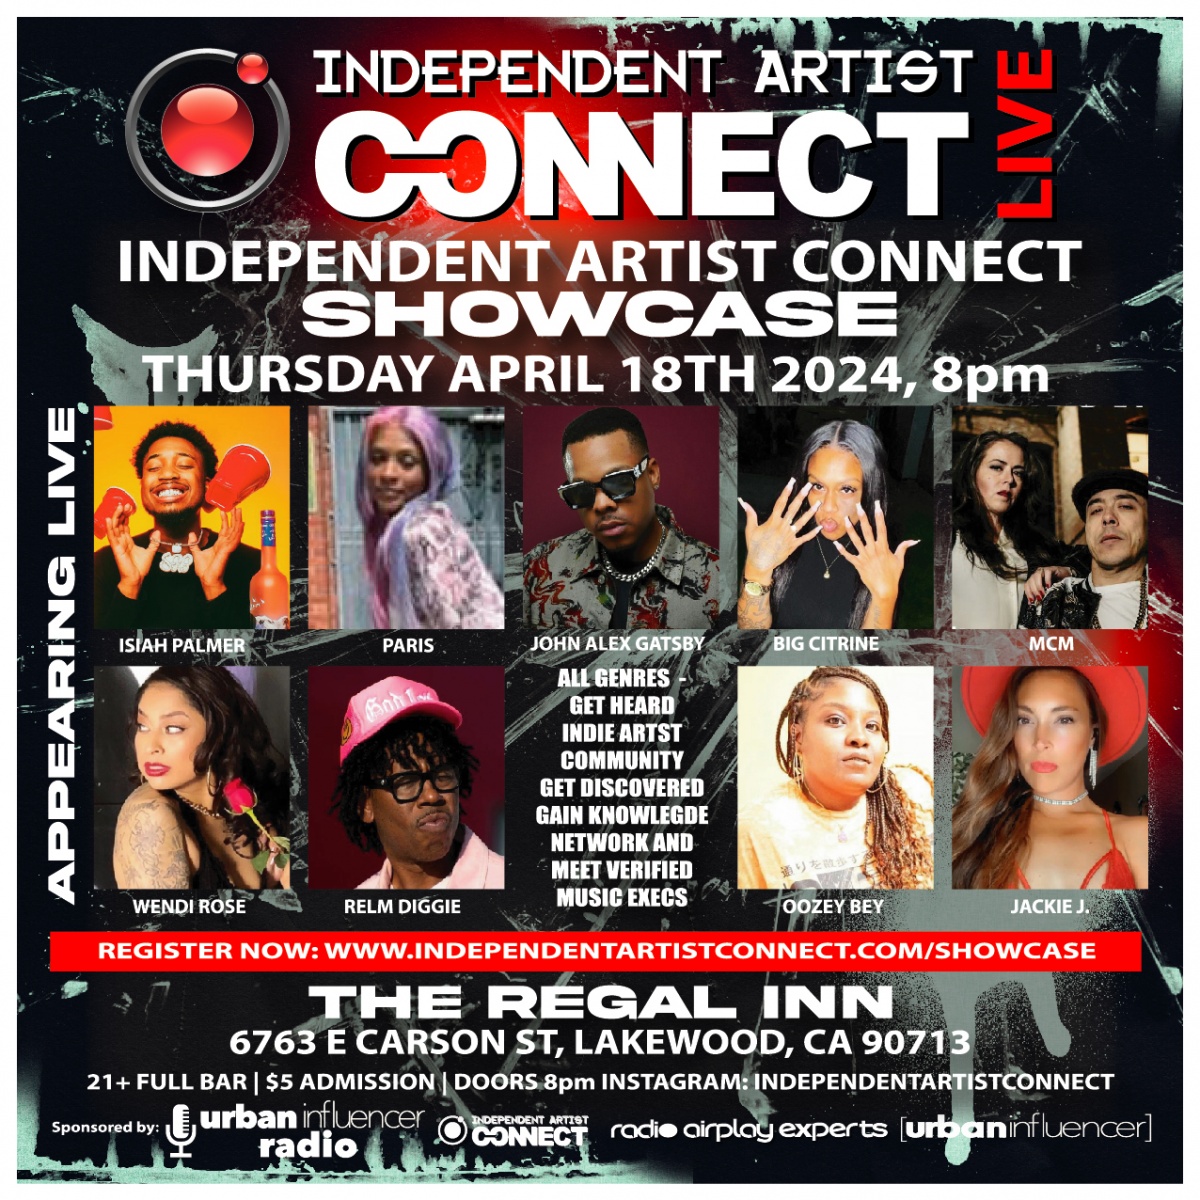 Event: INDPENDENT ARTIST CONNECT SHOWCASE 